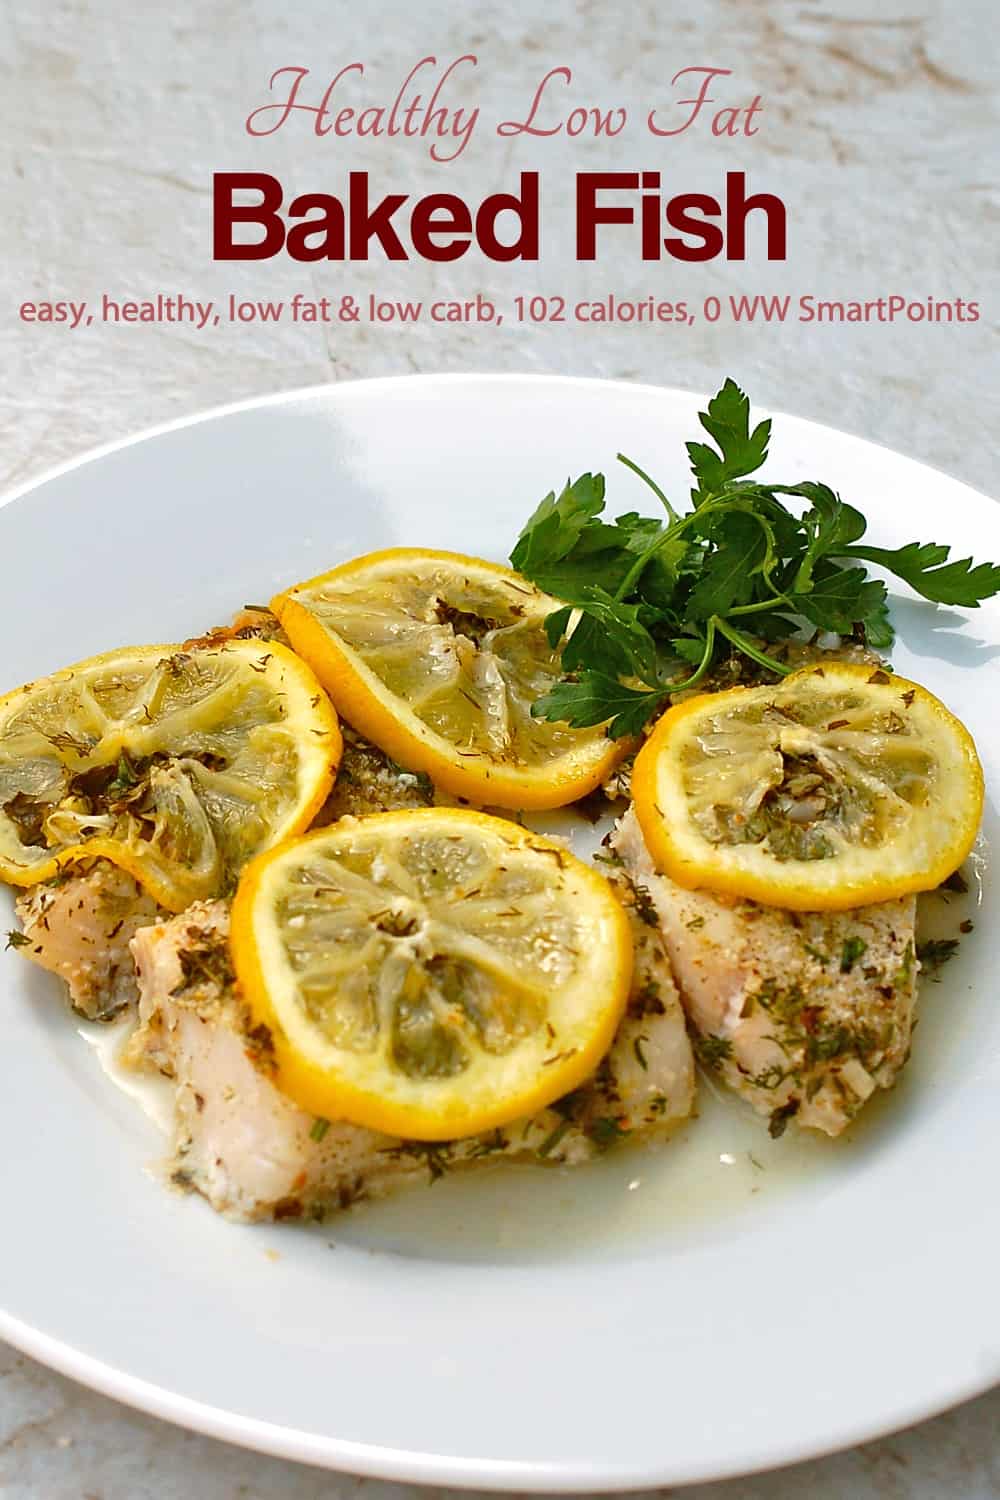 Baked fish topped with lemon slices and fresh herbs on a white plate.